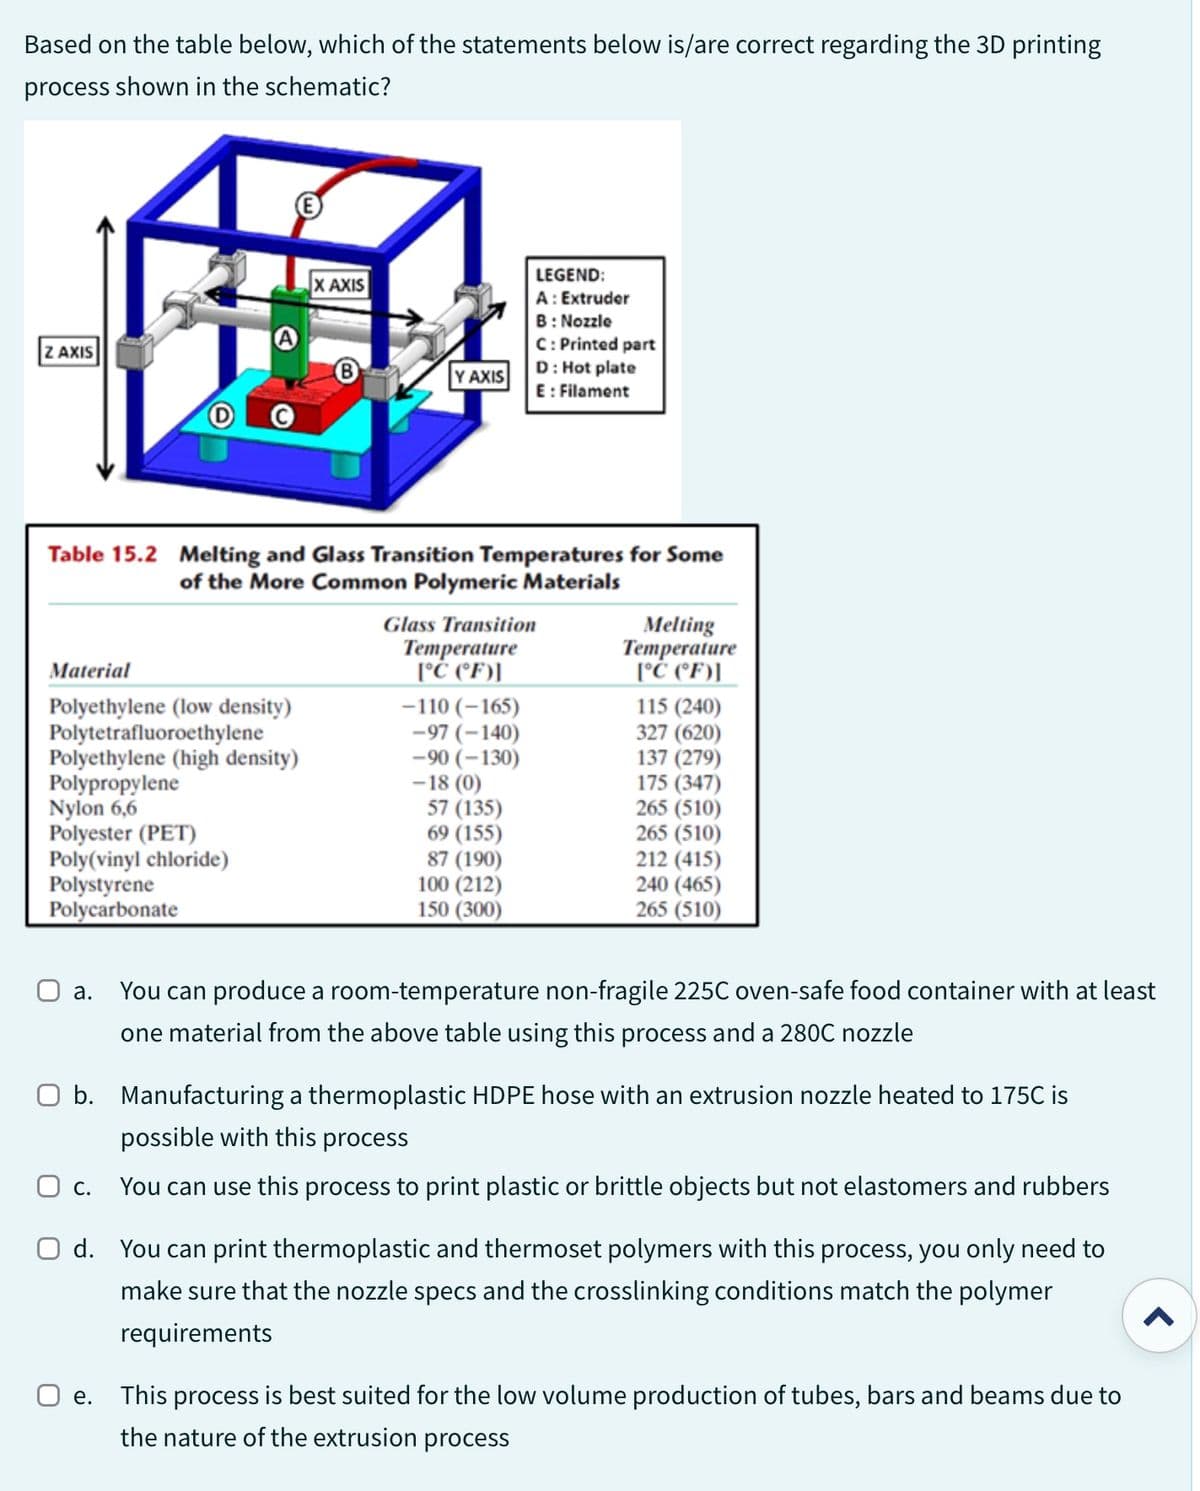 Based on the table below, which of the statements below is/are correct regarding the 3D printing
process shown in the schematic?
Z AXIS
Material
Polyethylene (low density)
Polytetrafluoroethylene
Polyethylene (high density)
Polypropylene
Nylon 6,6
Table 15.2 Melting and Glass Transition Temperatures for Some
of the More Common Polymeric Materials
Polyester (PET)
Poly(vinyl chloride)
Polystyrene
Polycarbonate
X AXIS
Y AXIS
e.
Glass Transition
Temperature
[°C (°F)]
-110 (-165)
-97 (-140)
-90 (-130)
-18 (0)
LEGEND:
A : Extruder
B: Nozzle
C: Printed part
D: Hot plate
E: Filament
57 (135)
69 (155)
87 (190)
100 (212)
150 (300)
Melting
Temperature
[°C (°F)]
115 (240)
327 (620)
137 (279)
175 (347)
265 (510)
265 (510)
212 (415)
240 (465)
265 (510)
O a. You can produce a room-temperature non-fragile 225C oven-safe food container with at least
one material from the above table using this process and a 280C nozzle
O b. Manufacturing a thermoplastic HDPE hose with an extrusion nozzle heated to 175C is
possible with this process
O c.
You can use this process to print plastic or brittle objects but not elastomers and rubbers
O d. You can print thermoplastic and thermoset polymers with this process, you only need to
make sure that the nozzle specs and the crosslinking conditions match the polymer
requirements
This process is best suited for the low volume production of tubes, bars and beams due to
the nature of the extrusion process